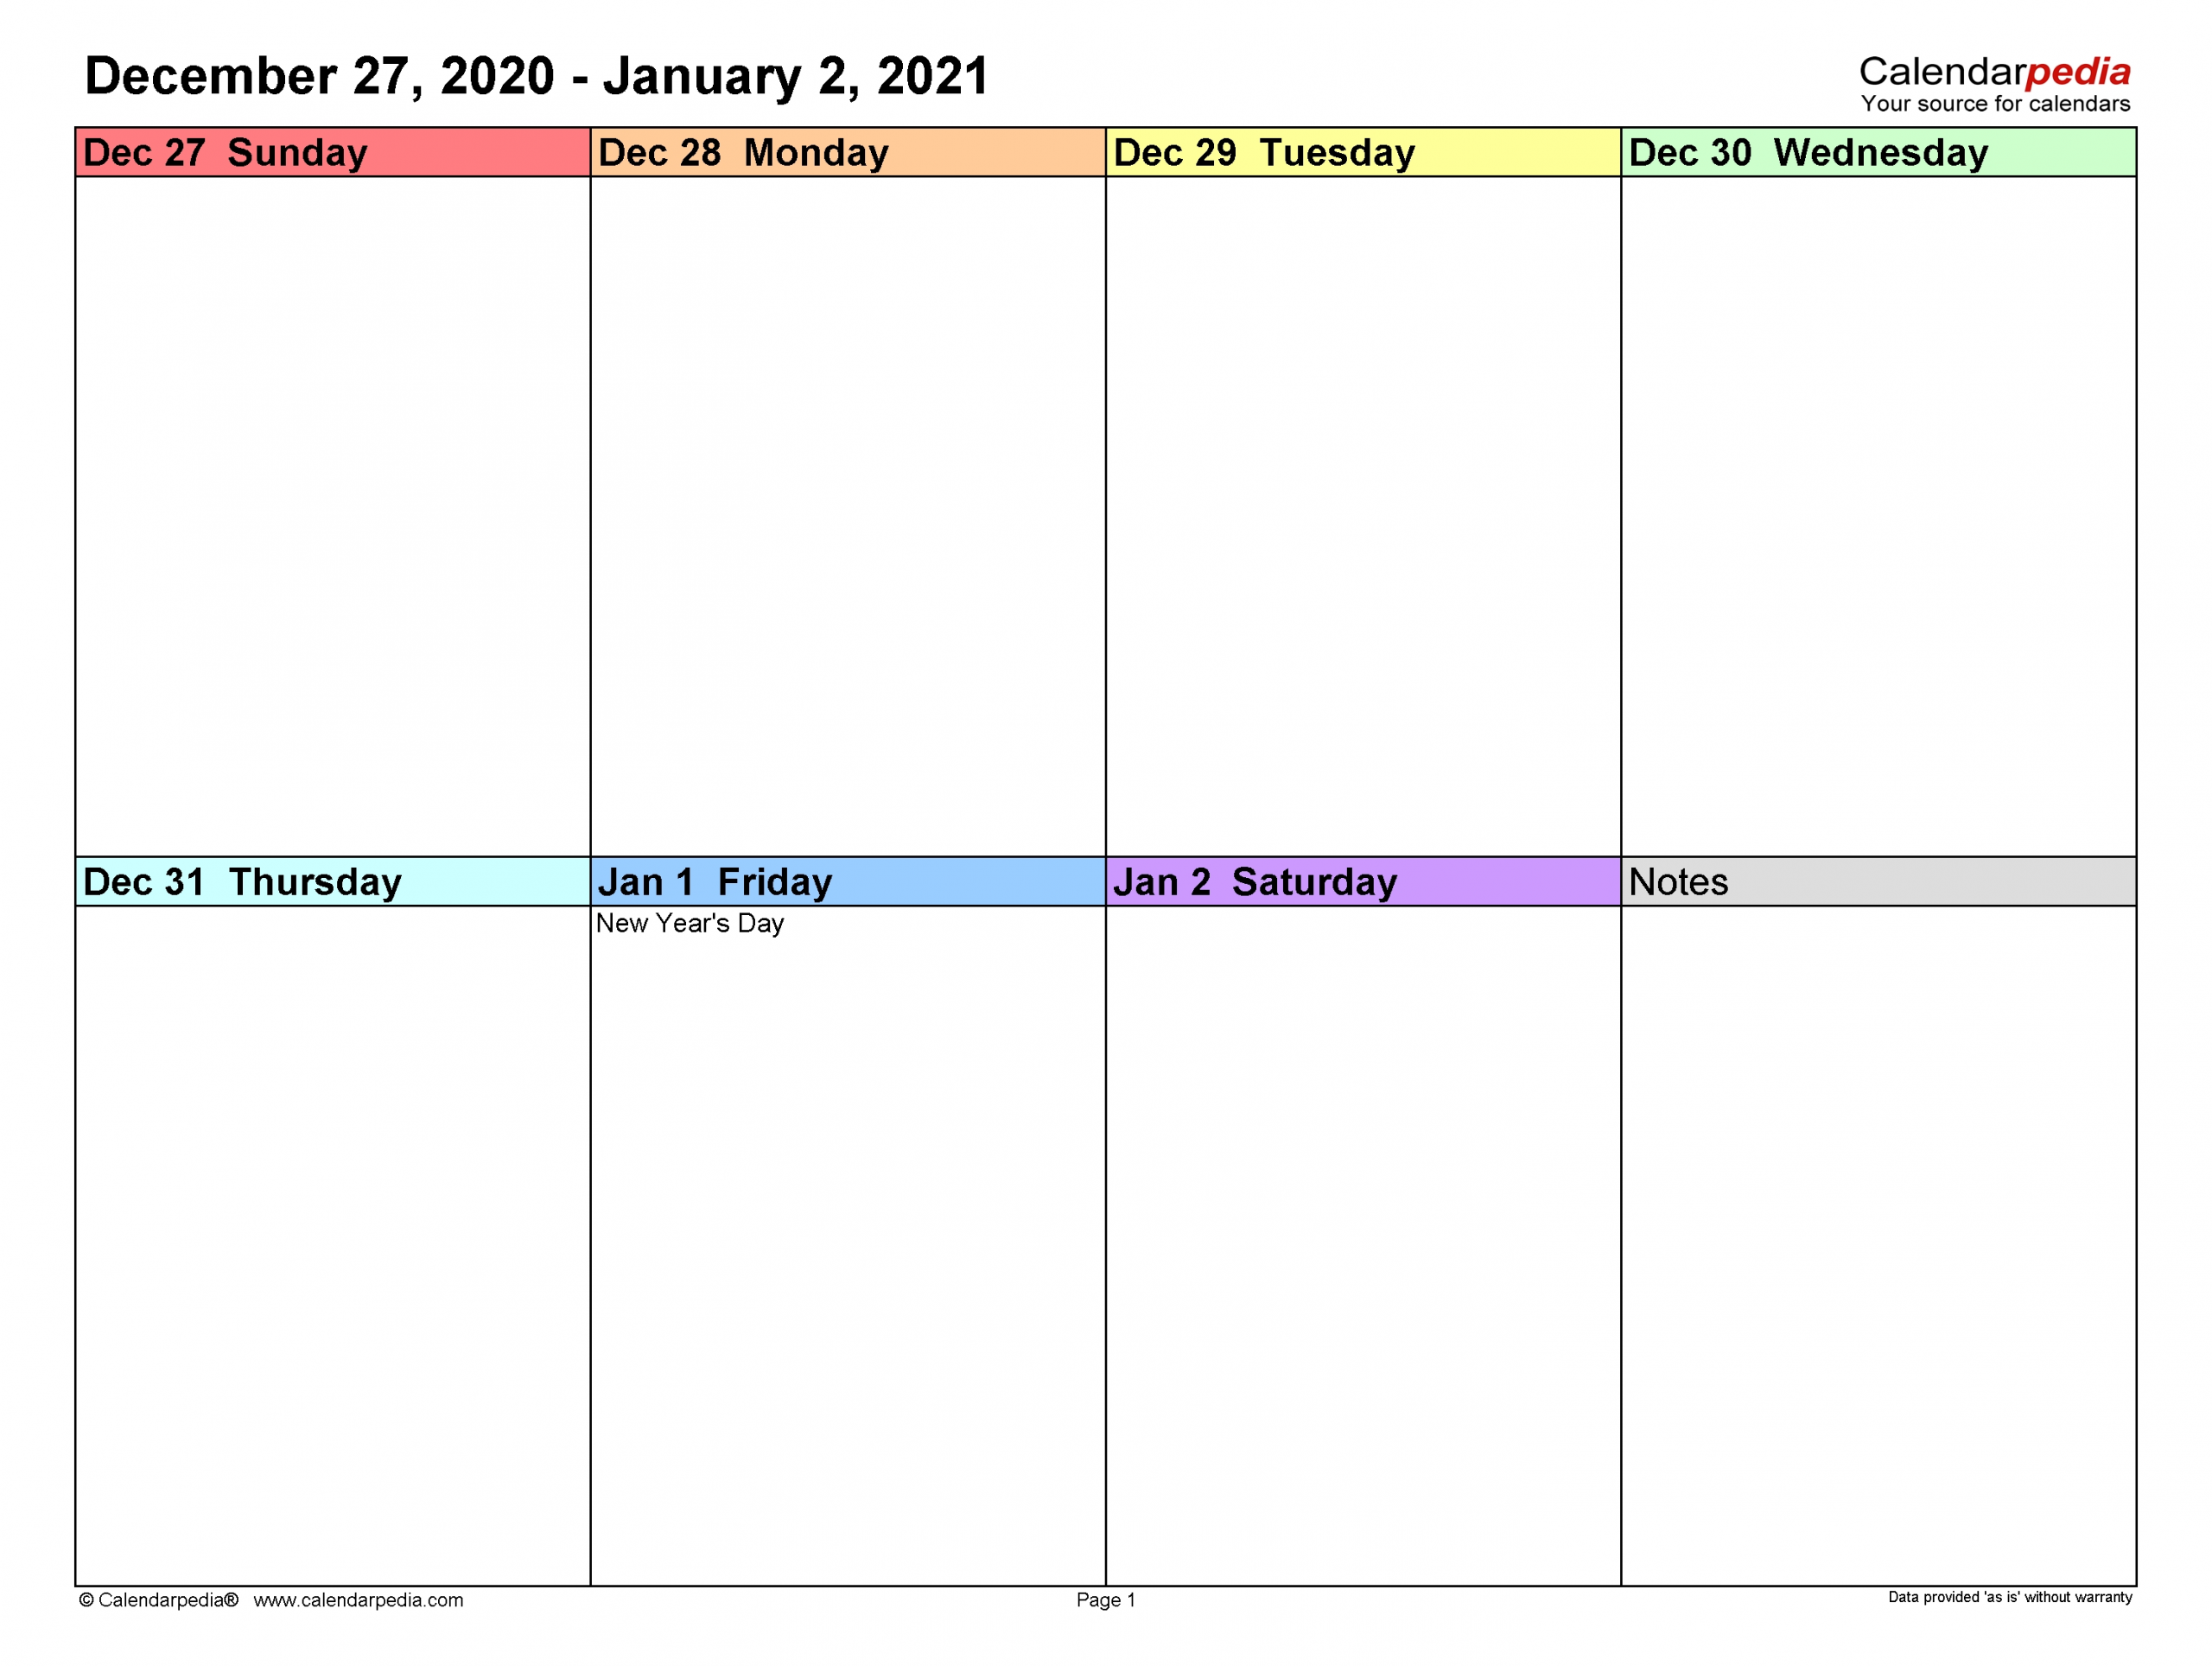 Weekly Calendars 2021 For Word - 12 Free Printable Templates-Free Hourly Calendar 2021